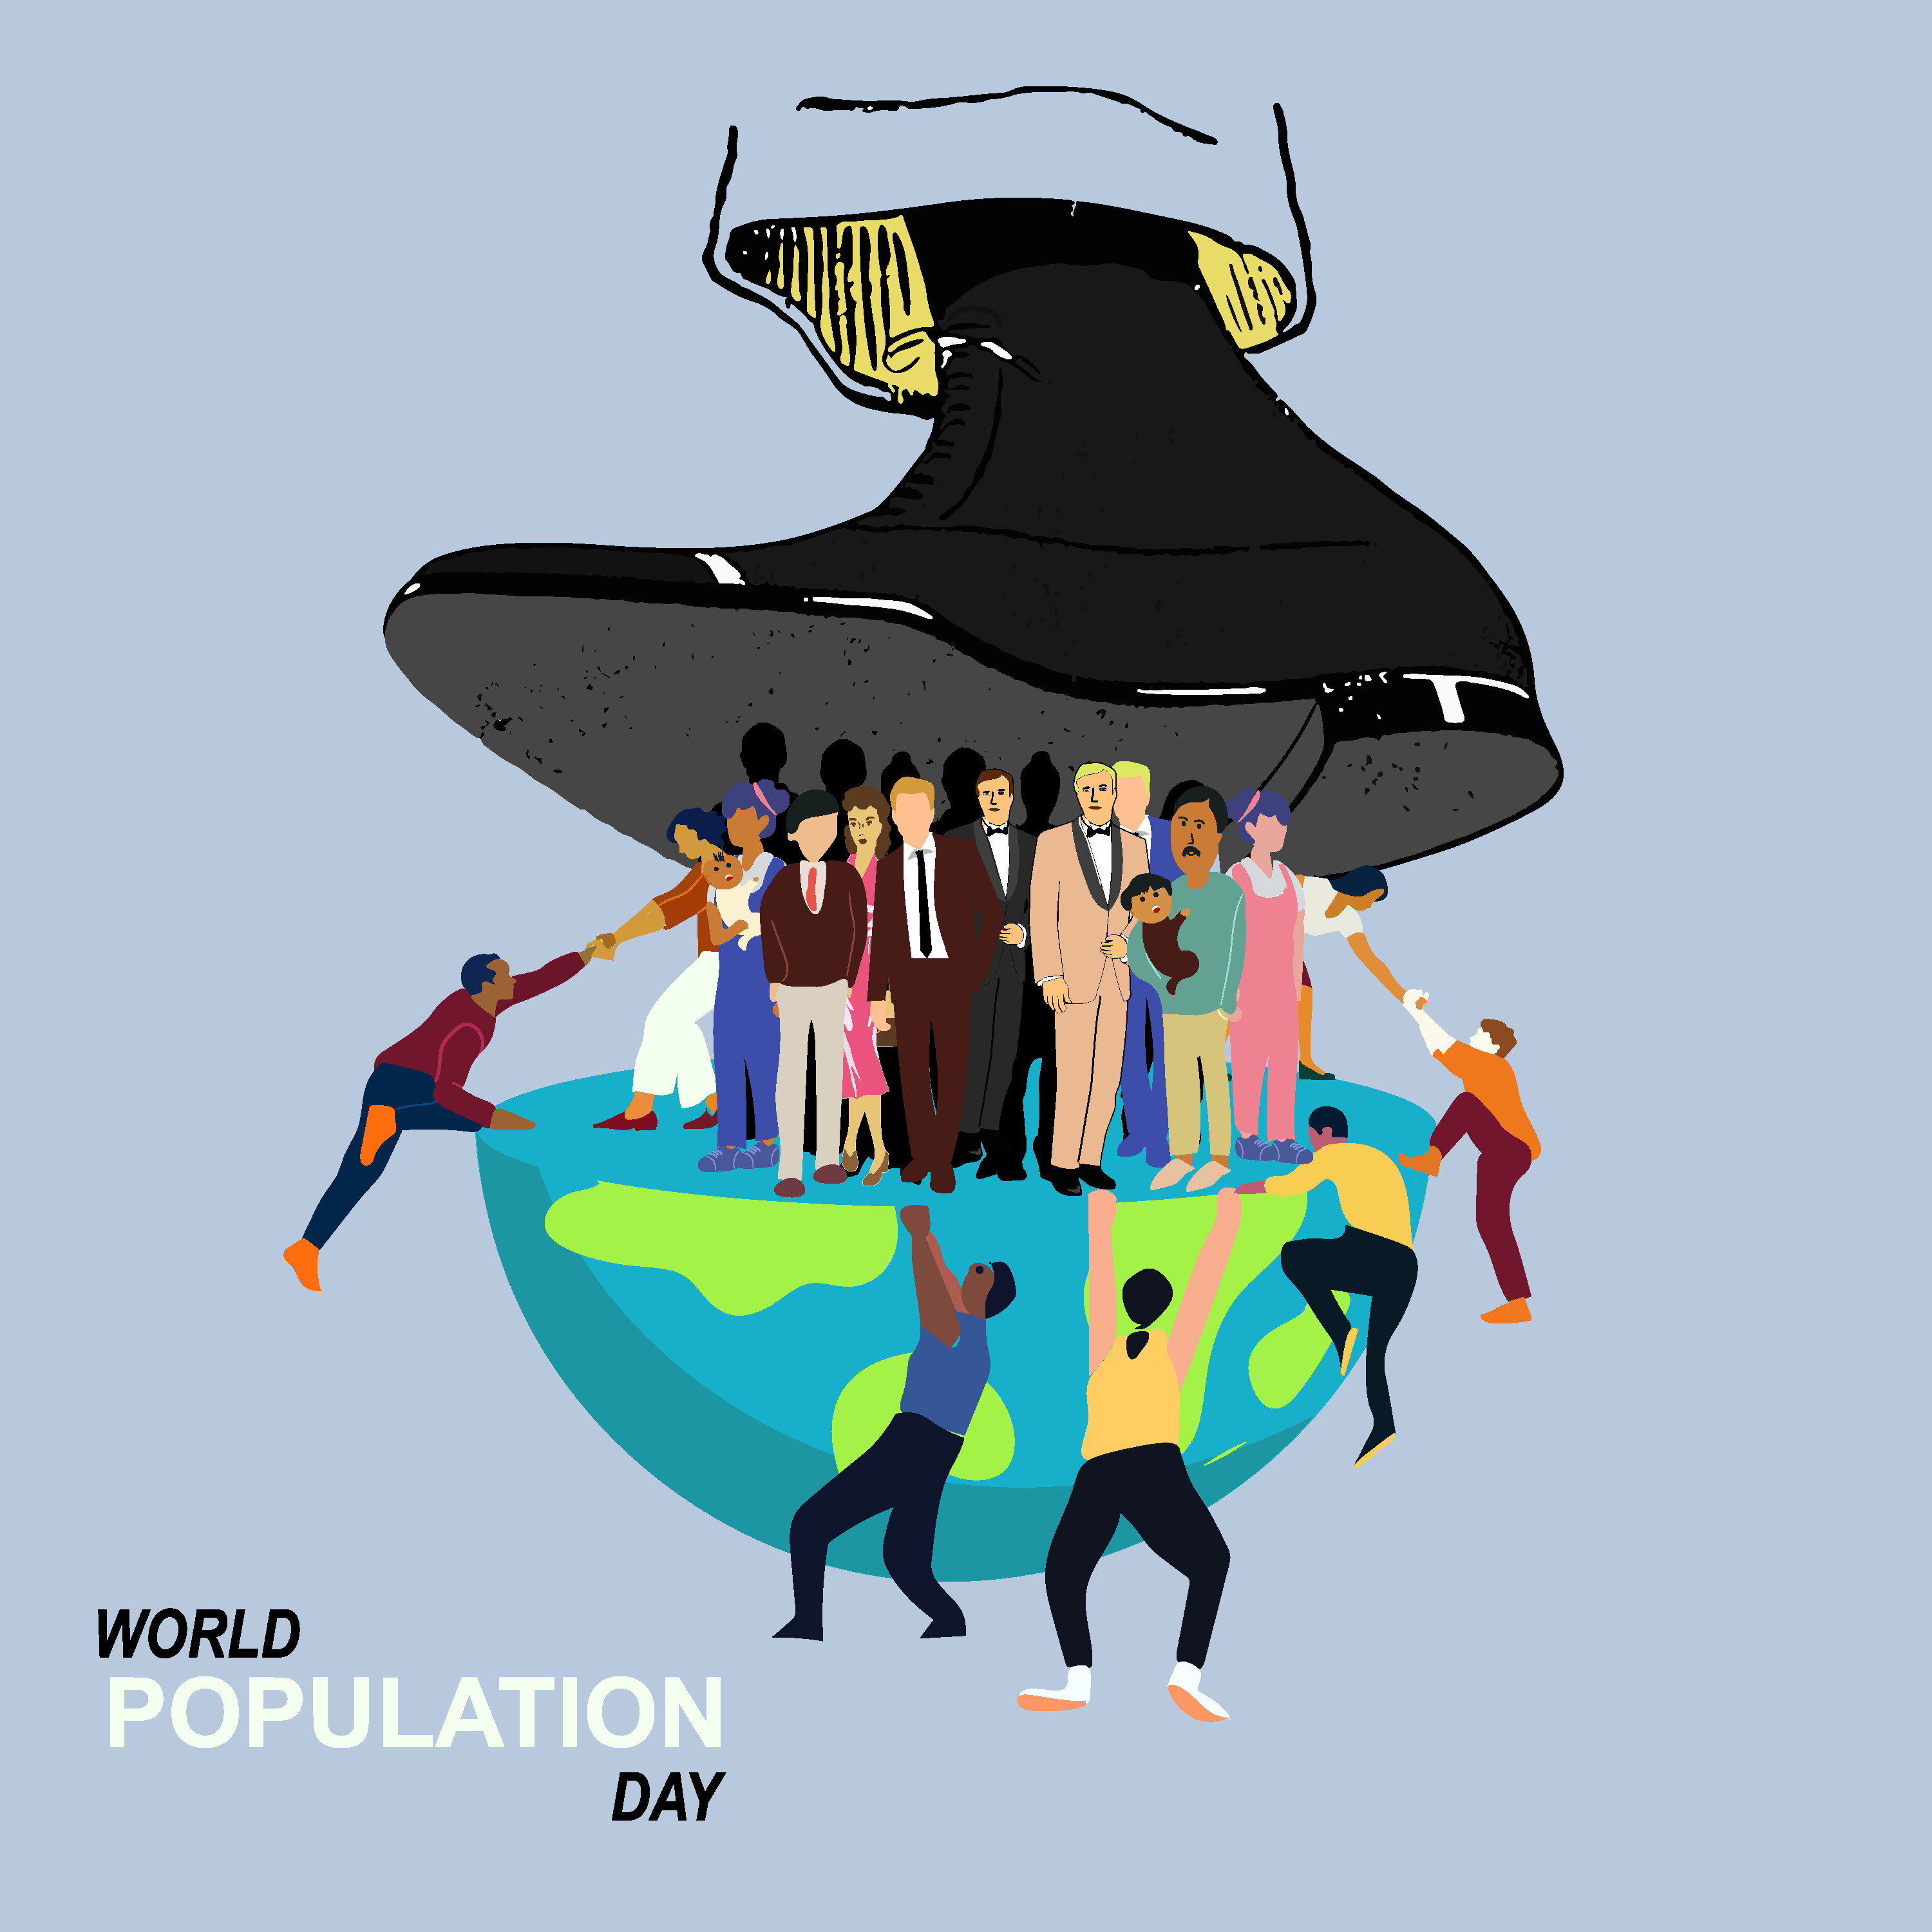 flat world population day illustration with people from different backgrounds and ages preview image.